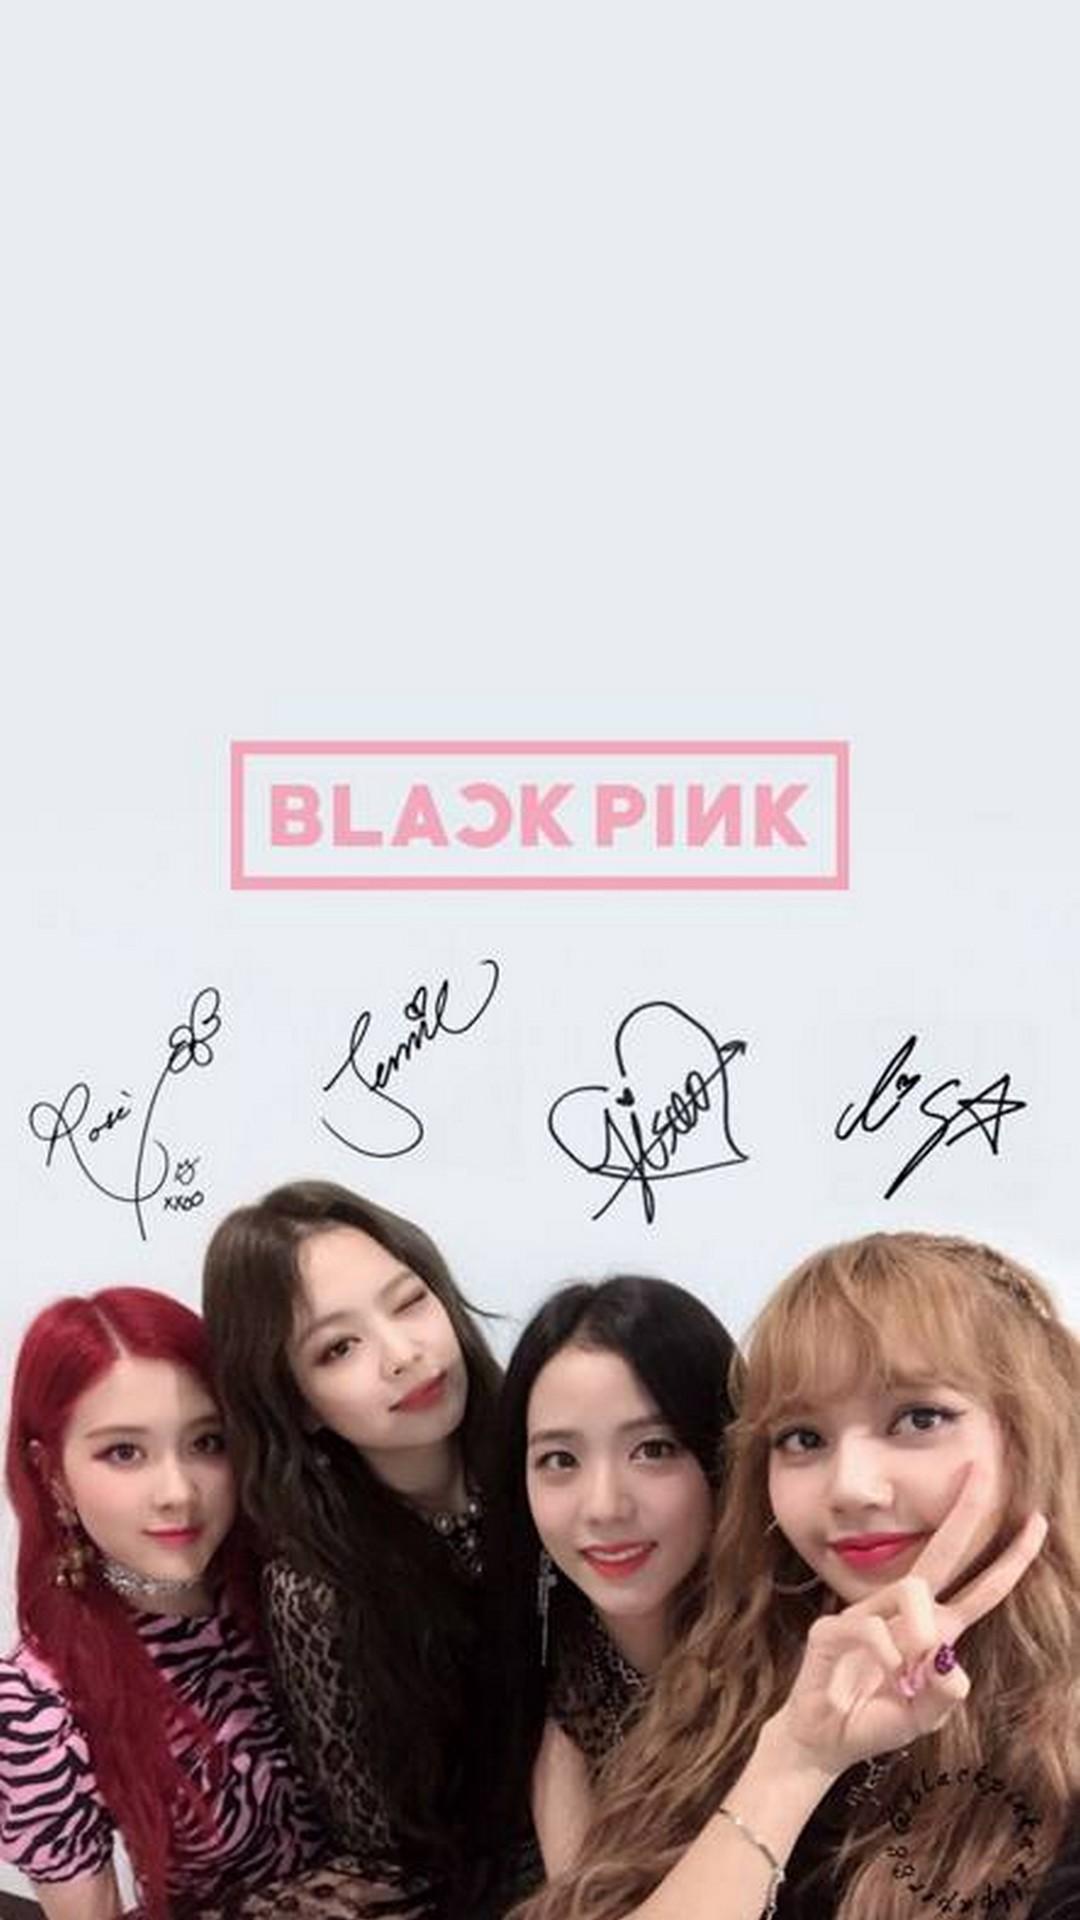 Wallpaper Blackpink Android Android Wallpaper